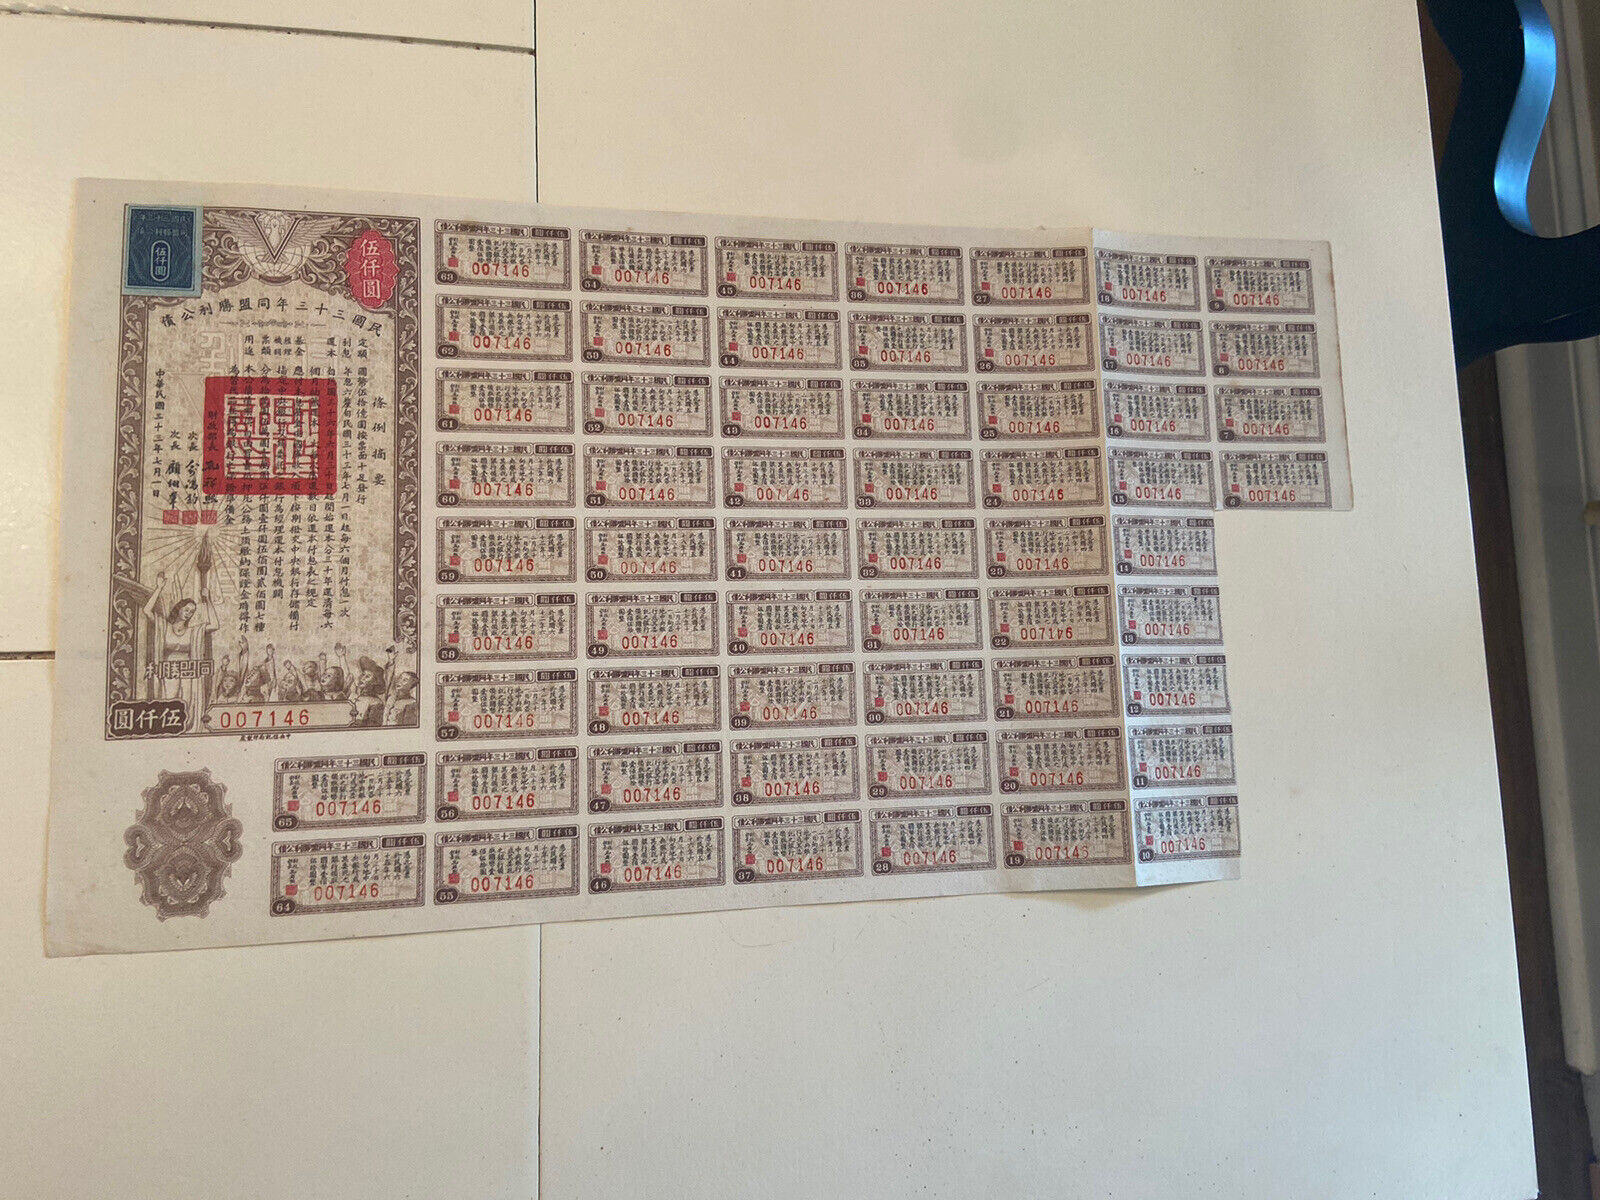 China 1944 Victory Bond $5000 With Coupons Uncanceled R4B01